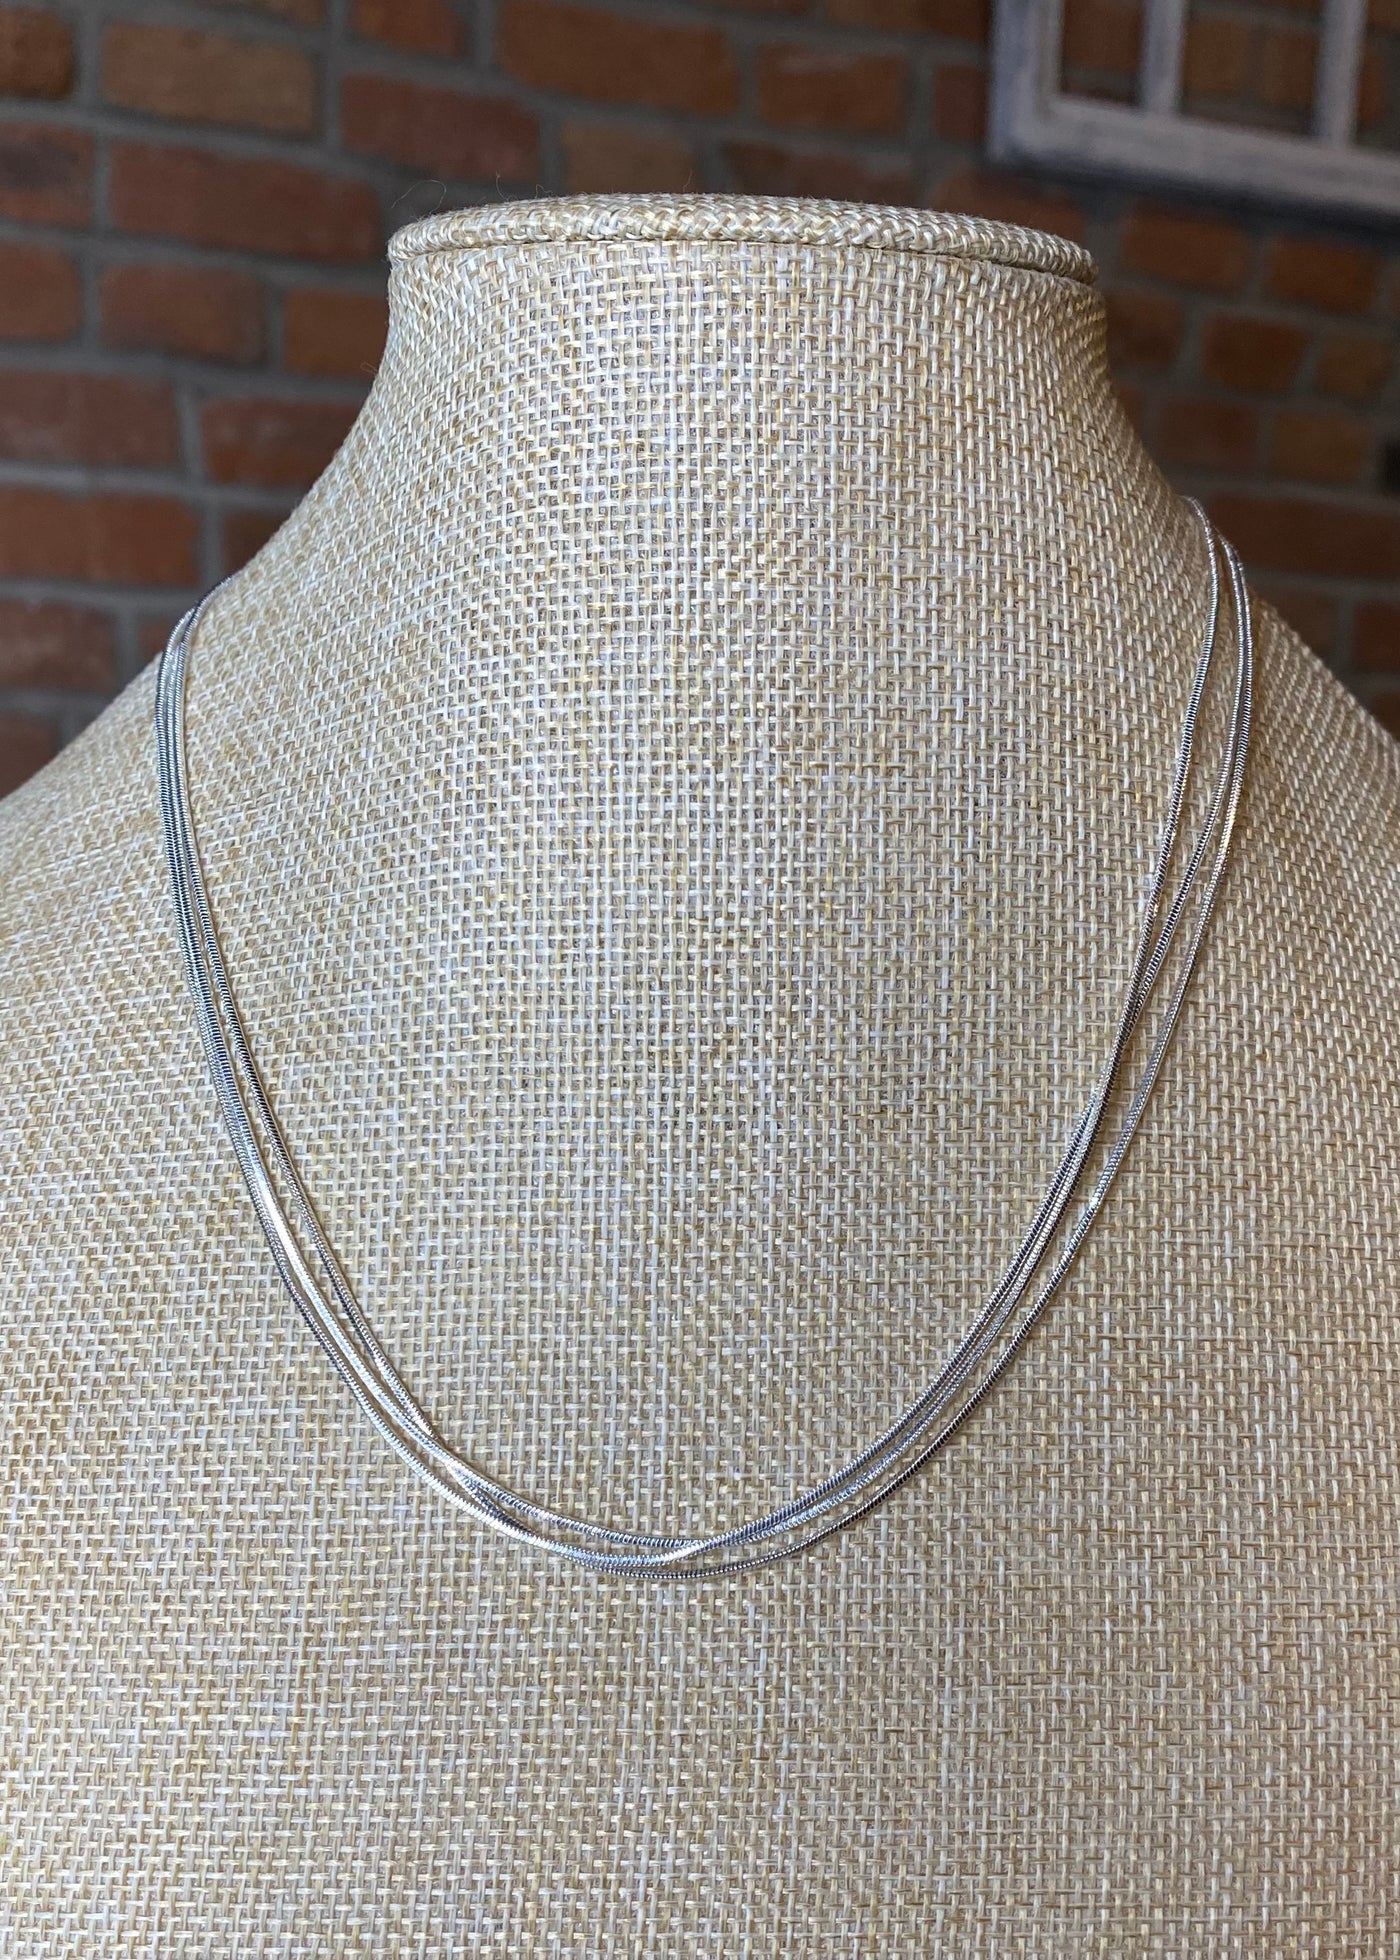 Triple Layered Snake Chain Necklace Silver